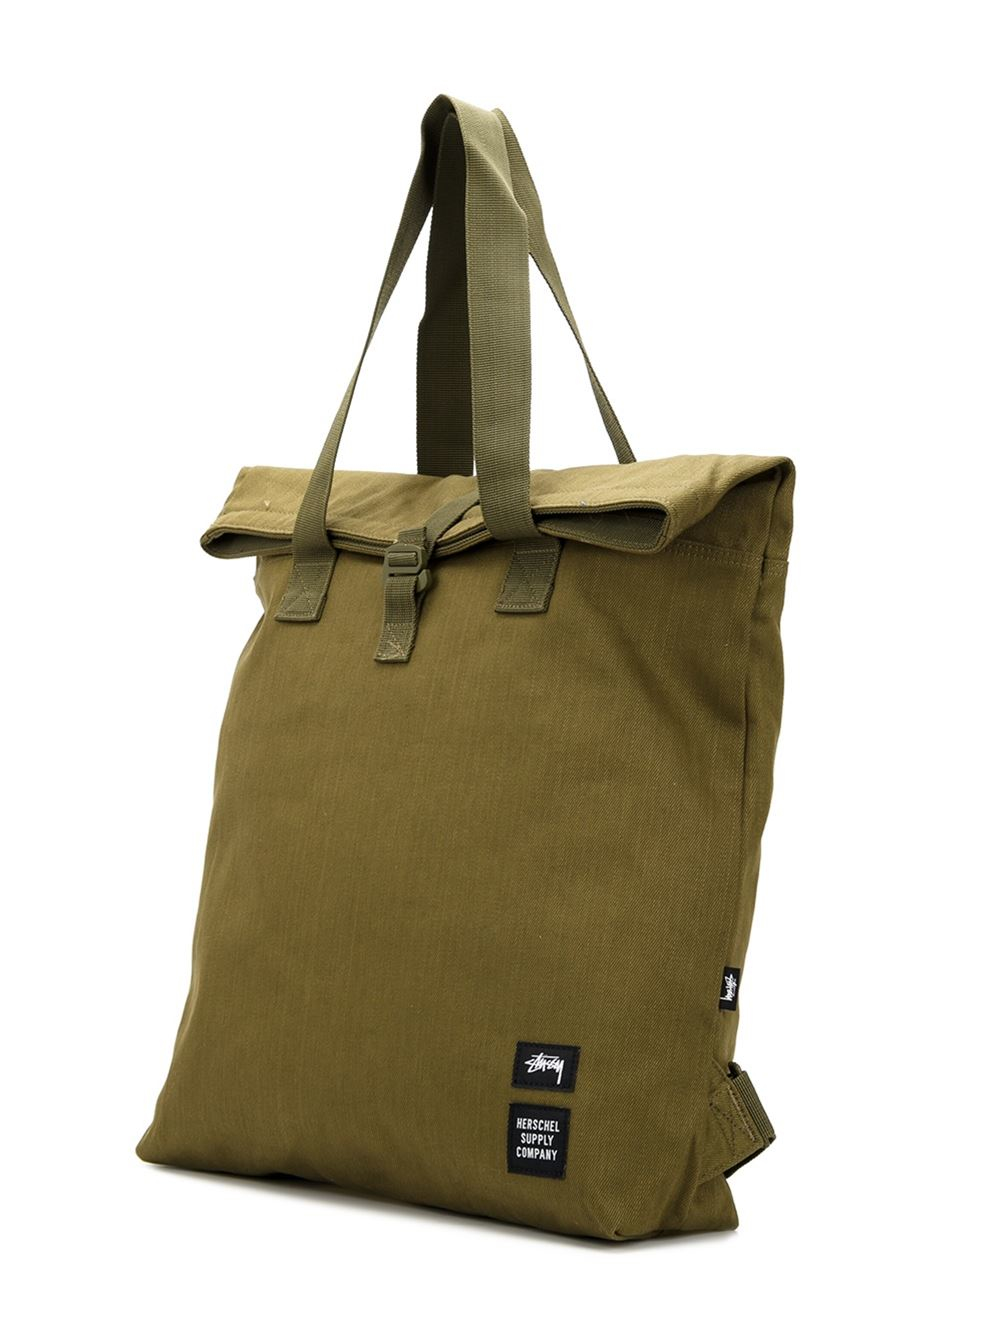 Stussy Canvas Tote Bag in Green - Lyst